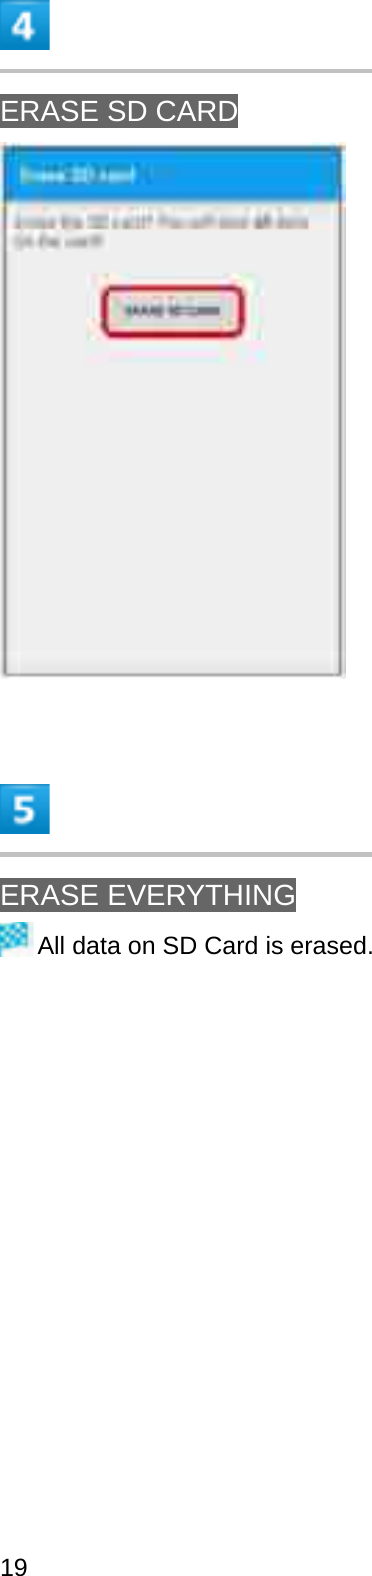 ERASE SD CARDERASE EVERYTHINGAll data on SD Card is erased.19